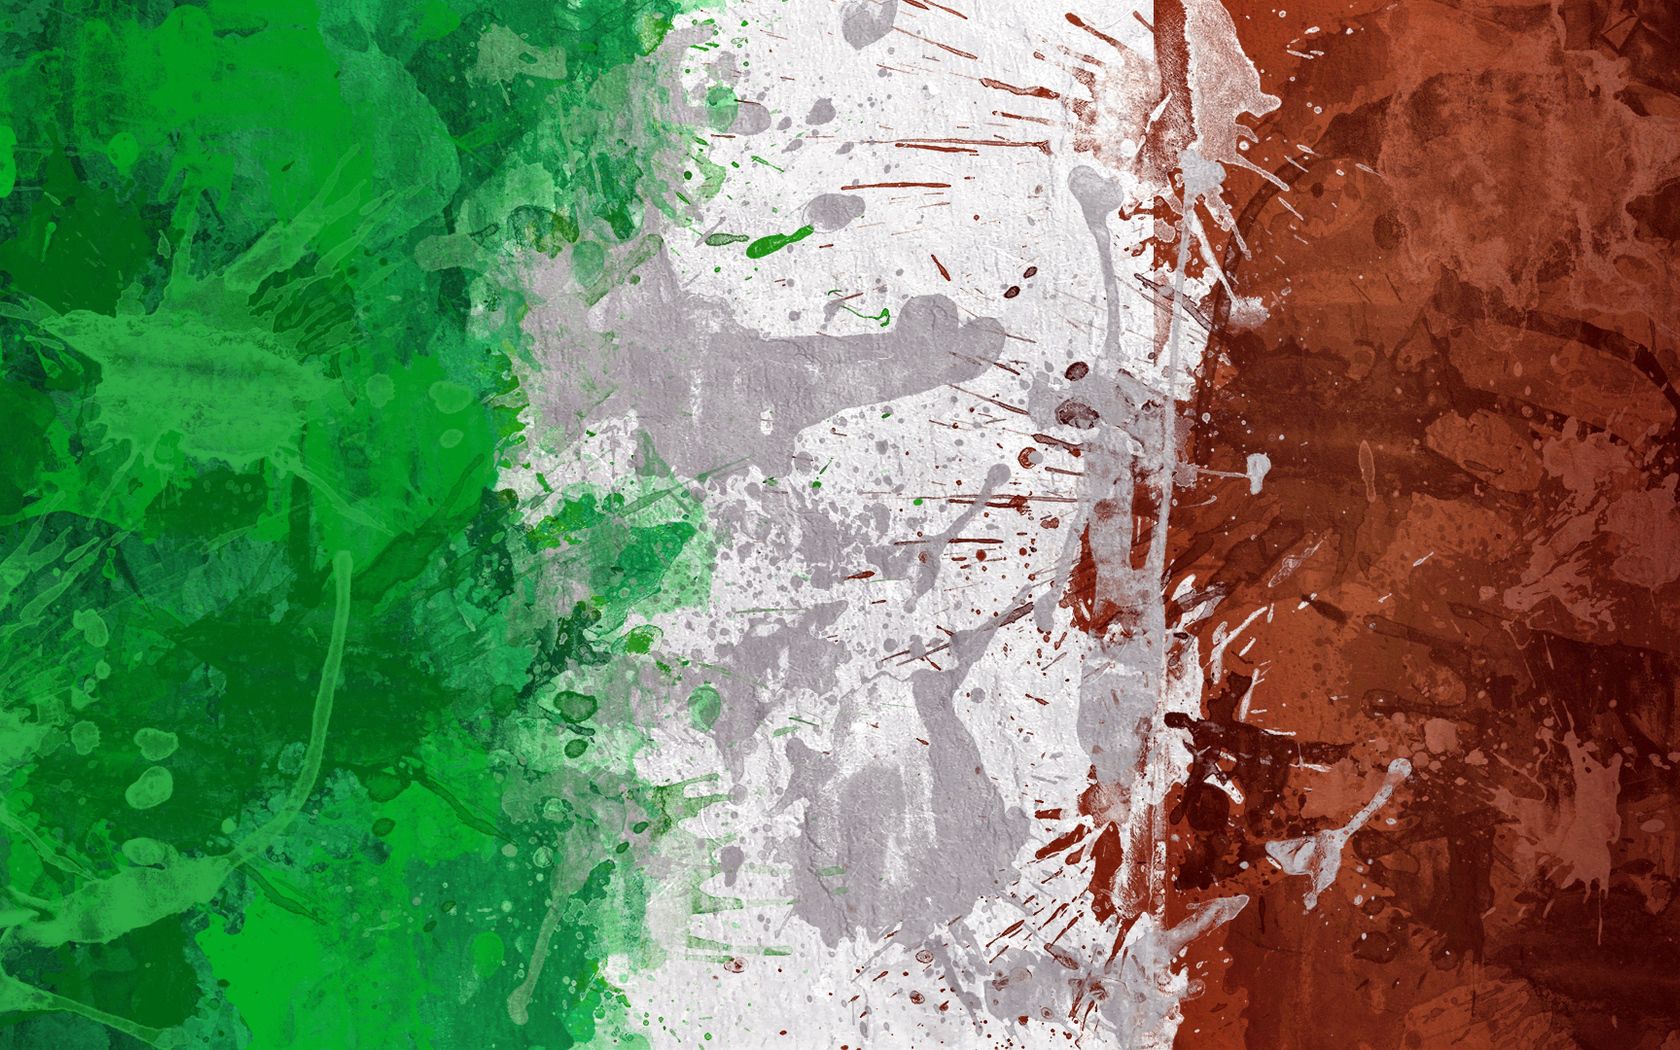 italy, background, texture, textures, stains, spots, flag